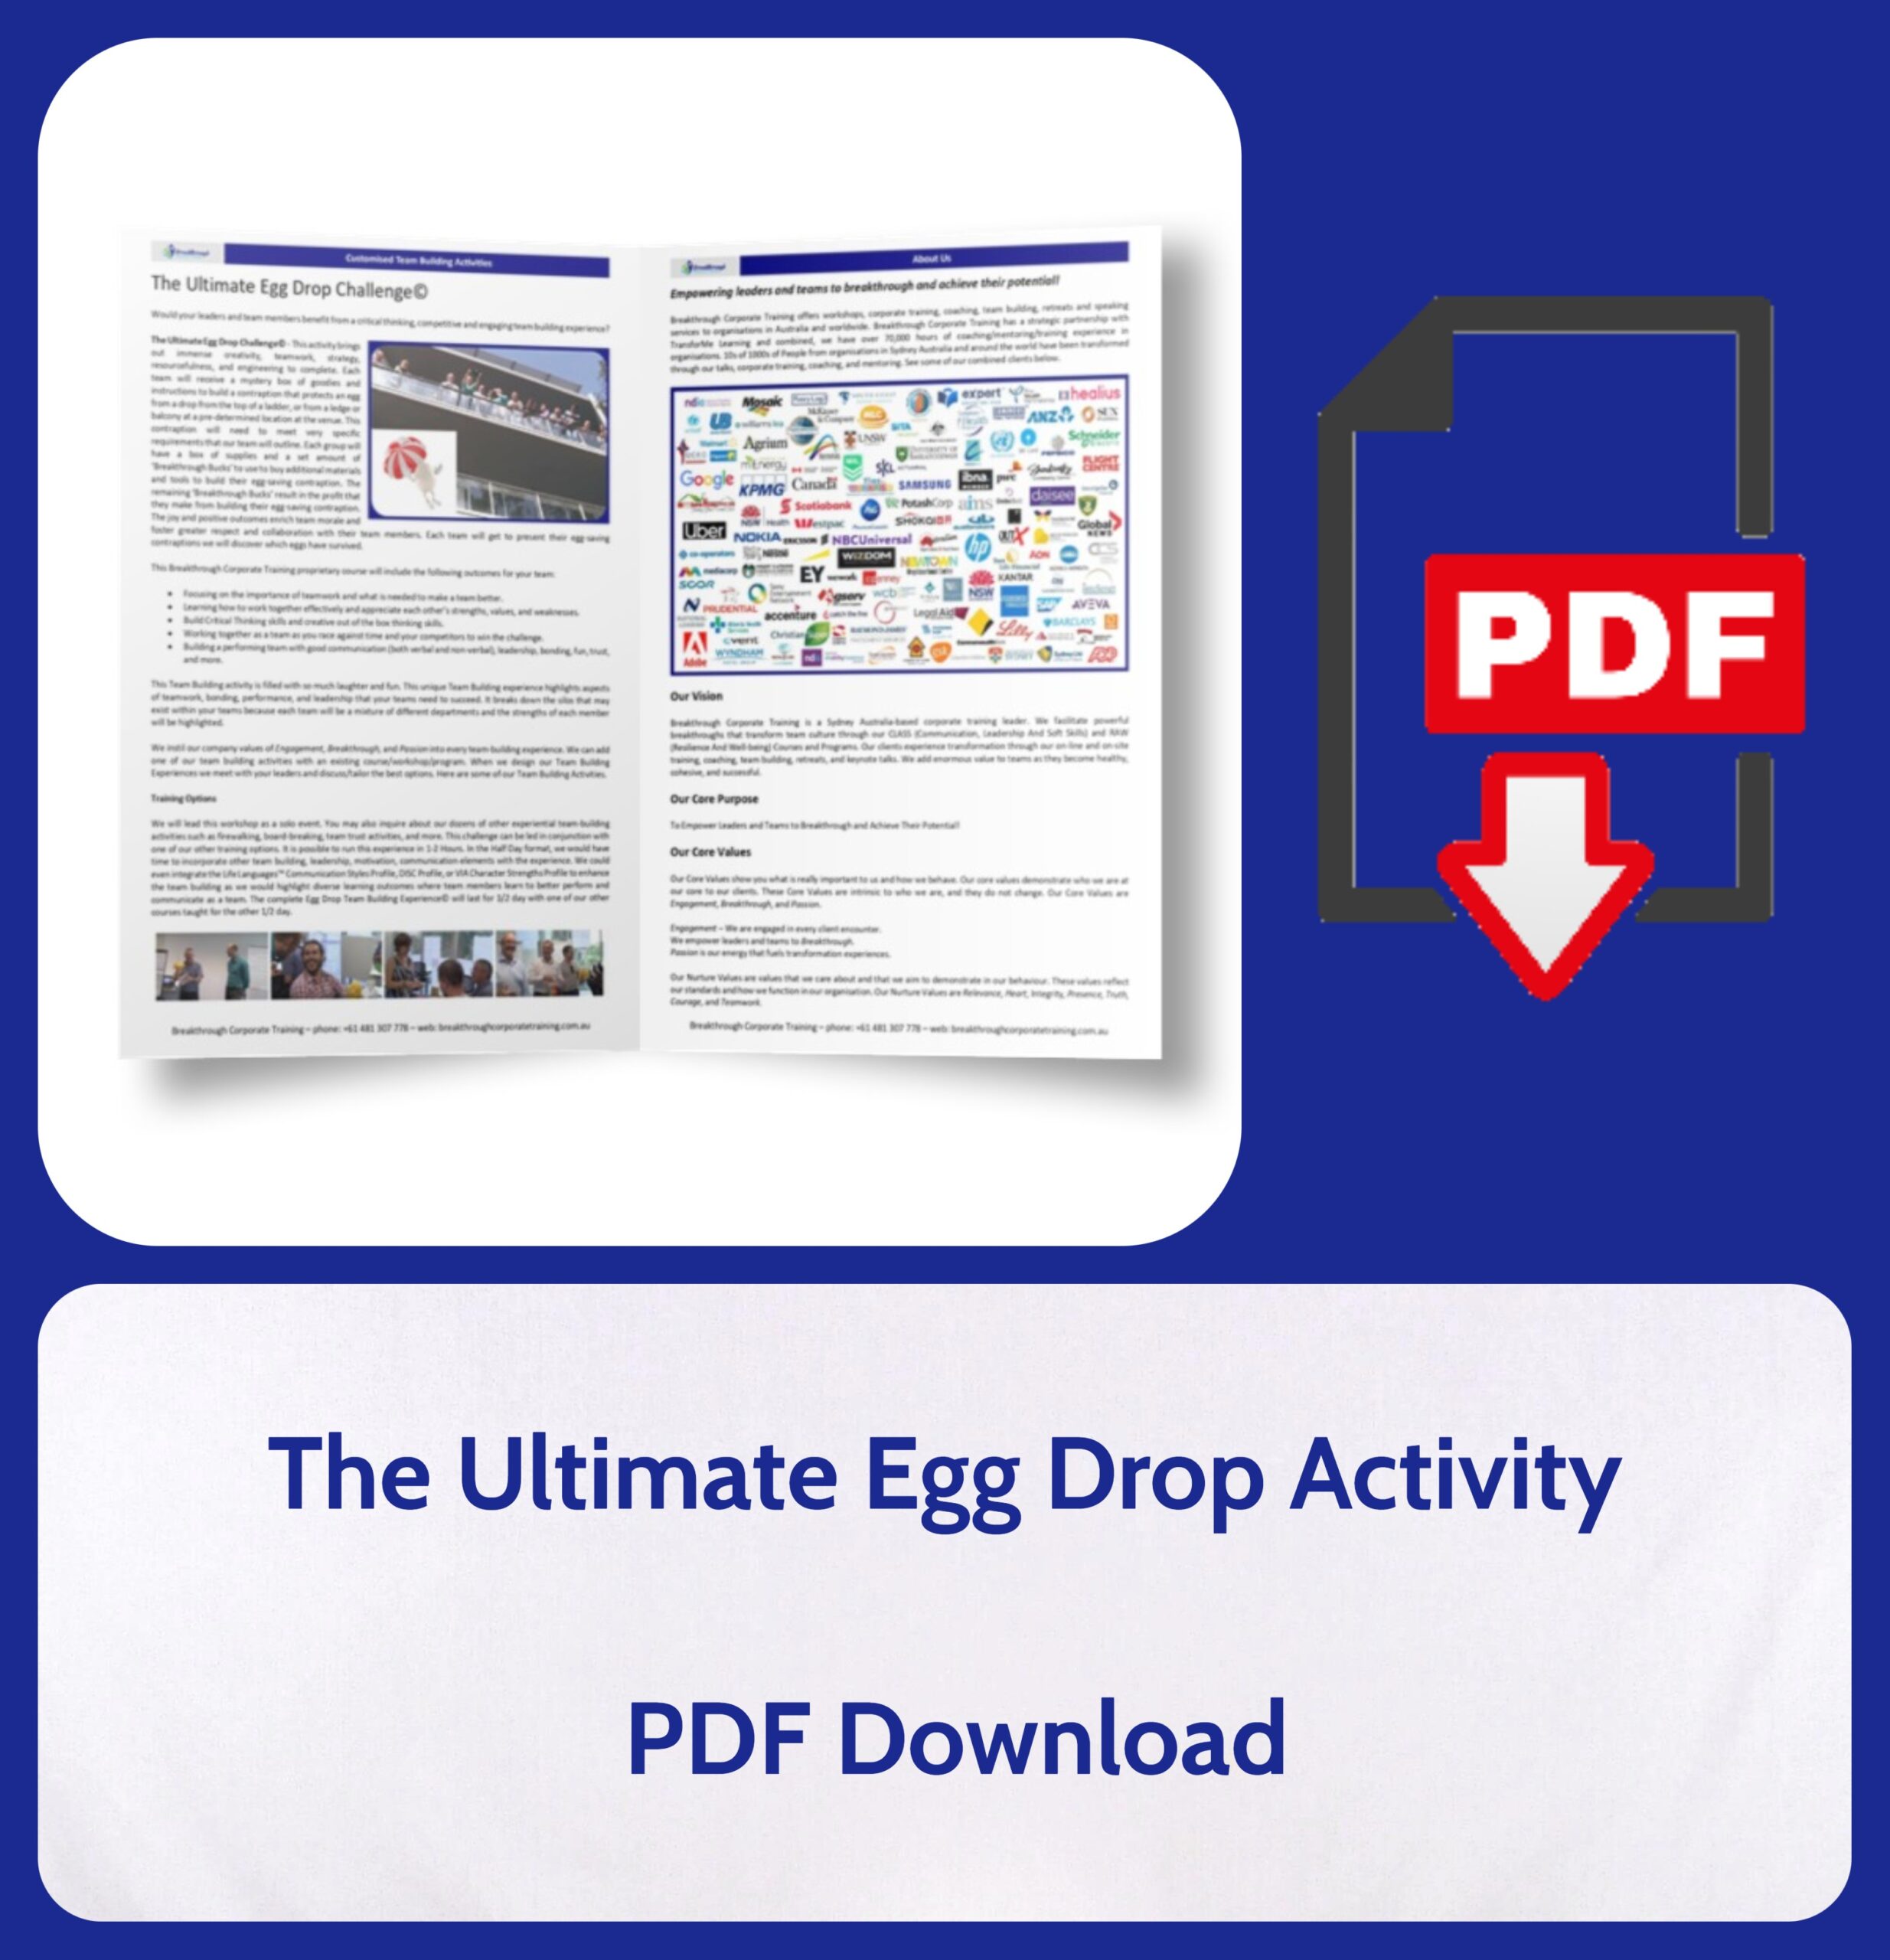 The Ultimate Egg Drop Activity